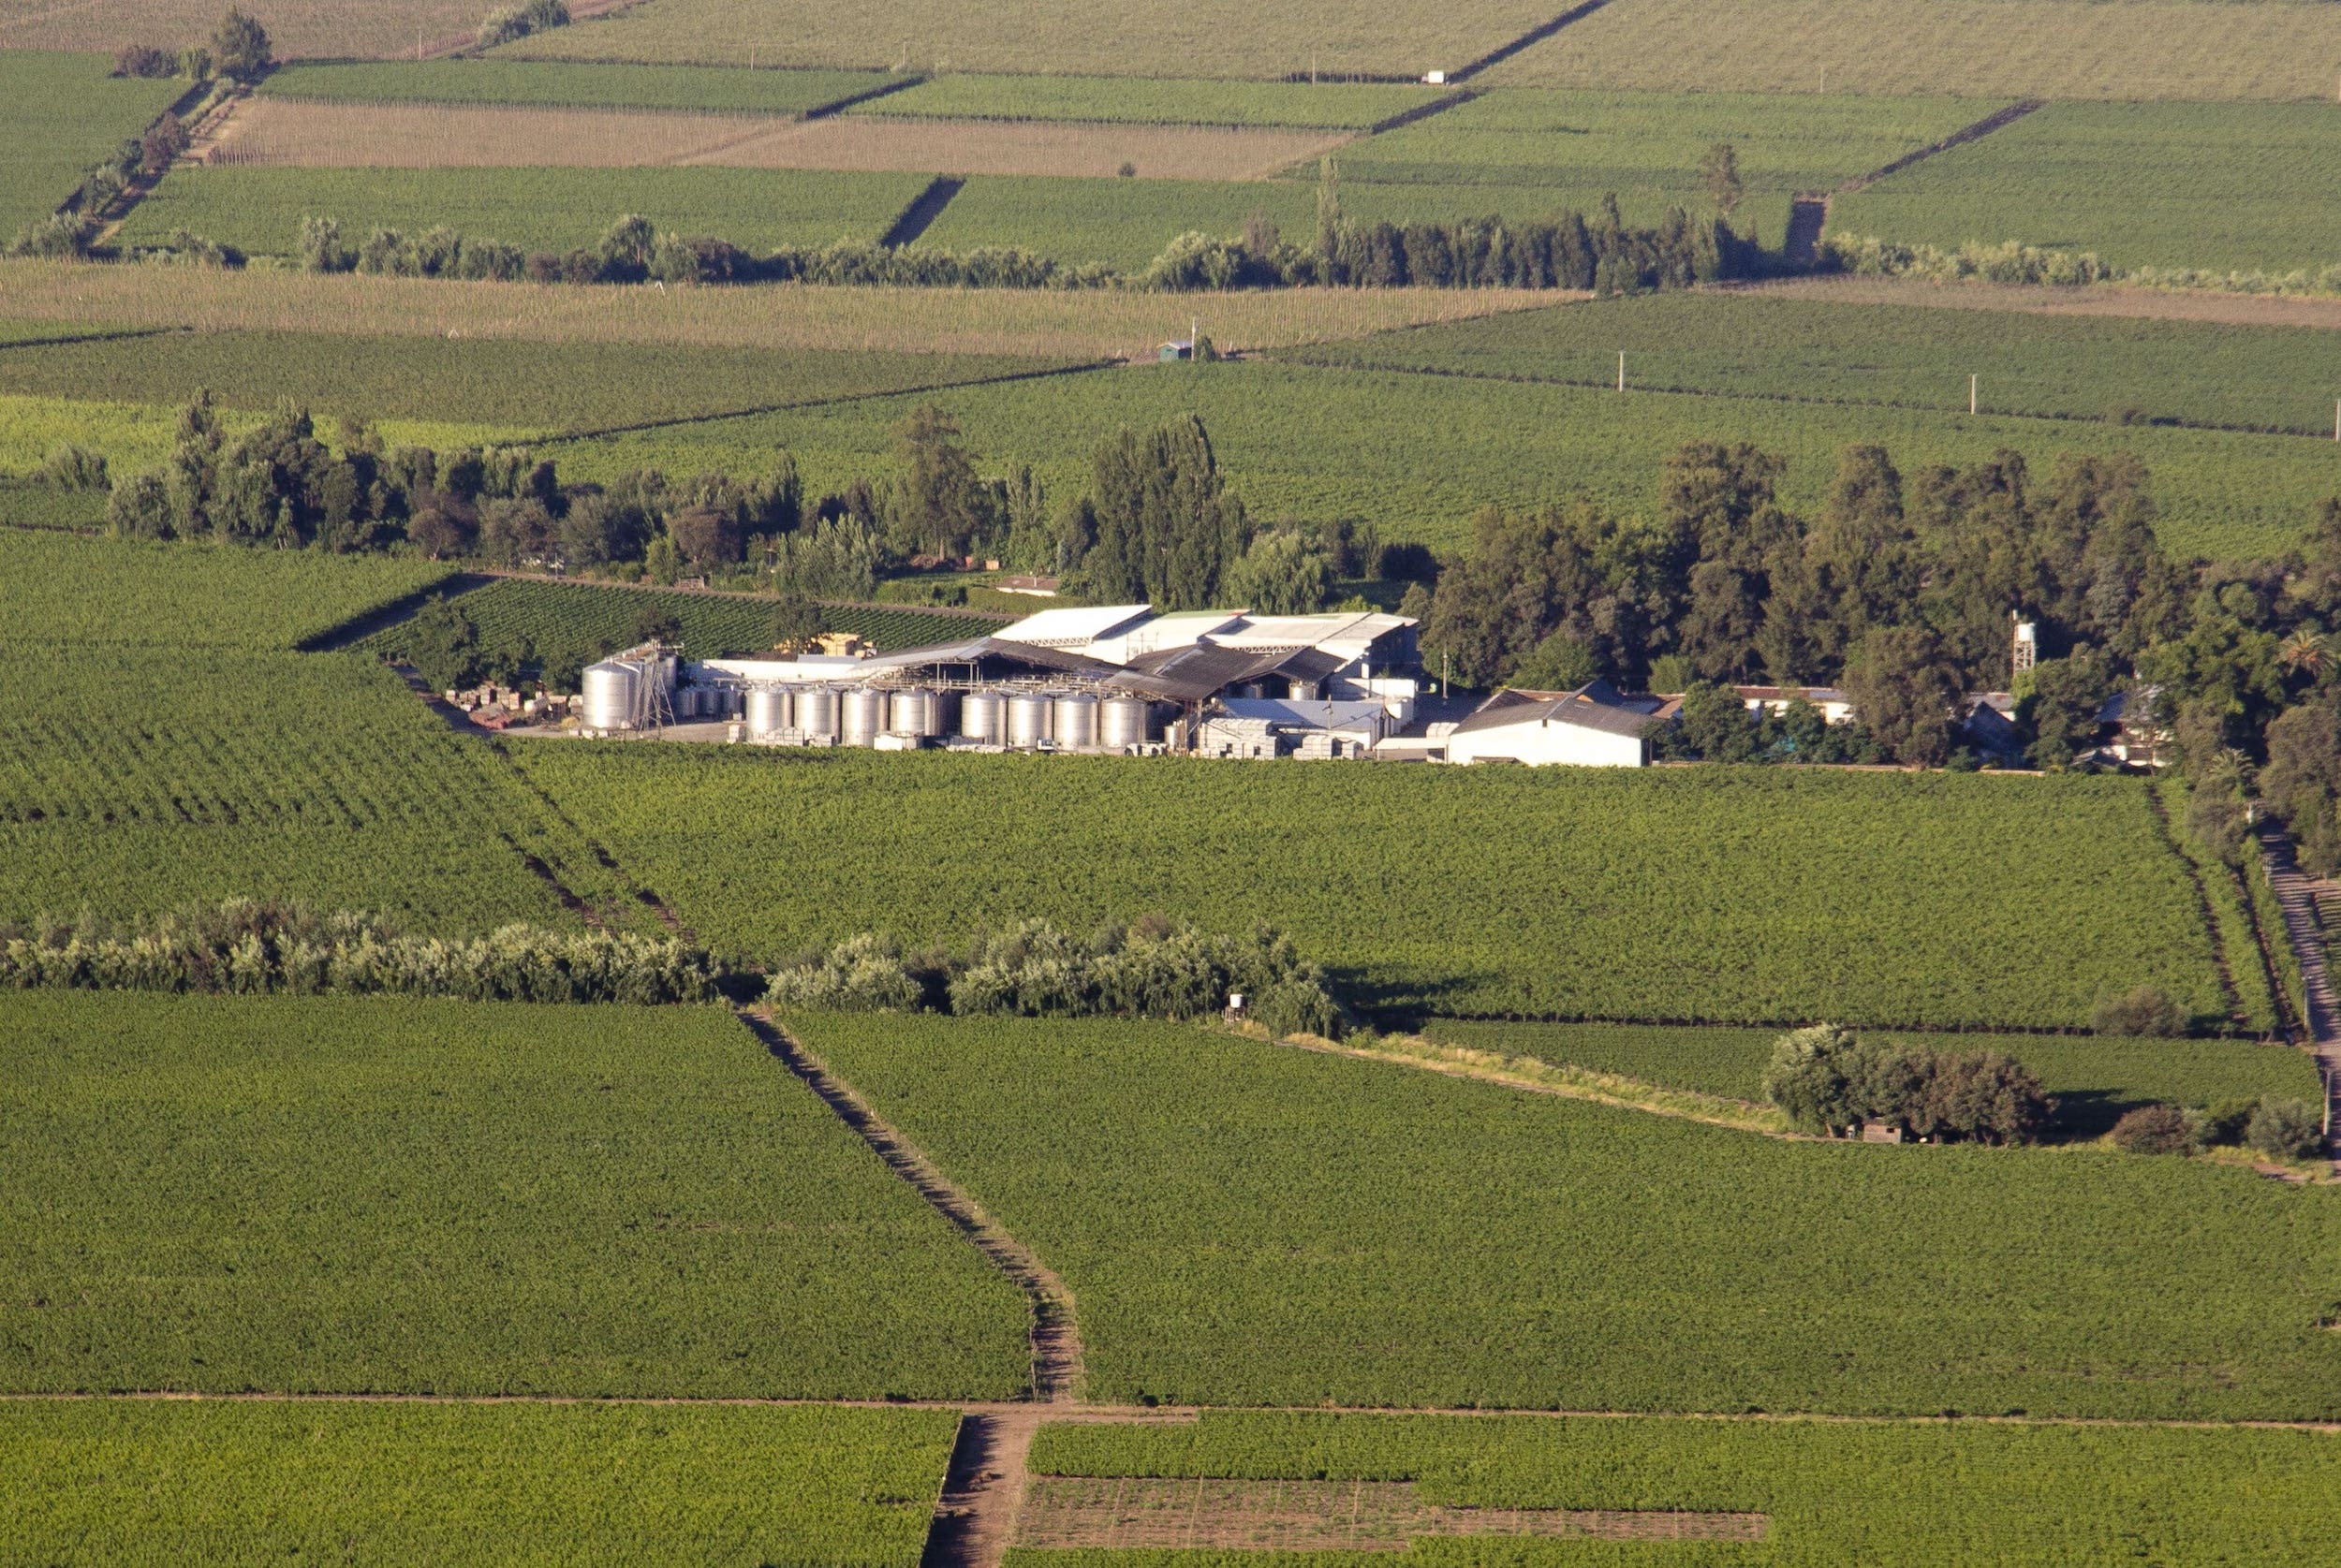 Viña Requingua winery in Curico Chile. Guide to wineries in Chile, South America Wine Guide.